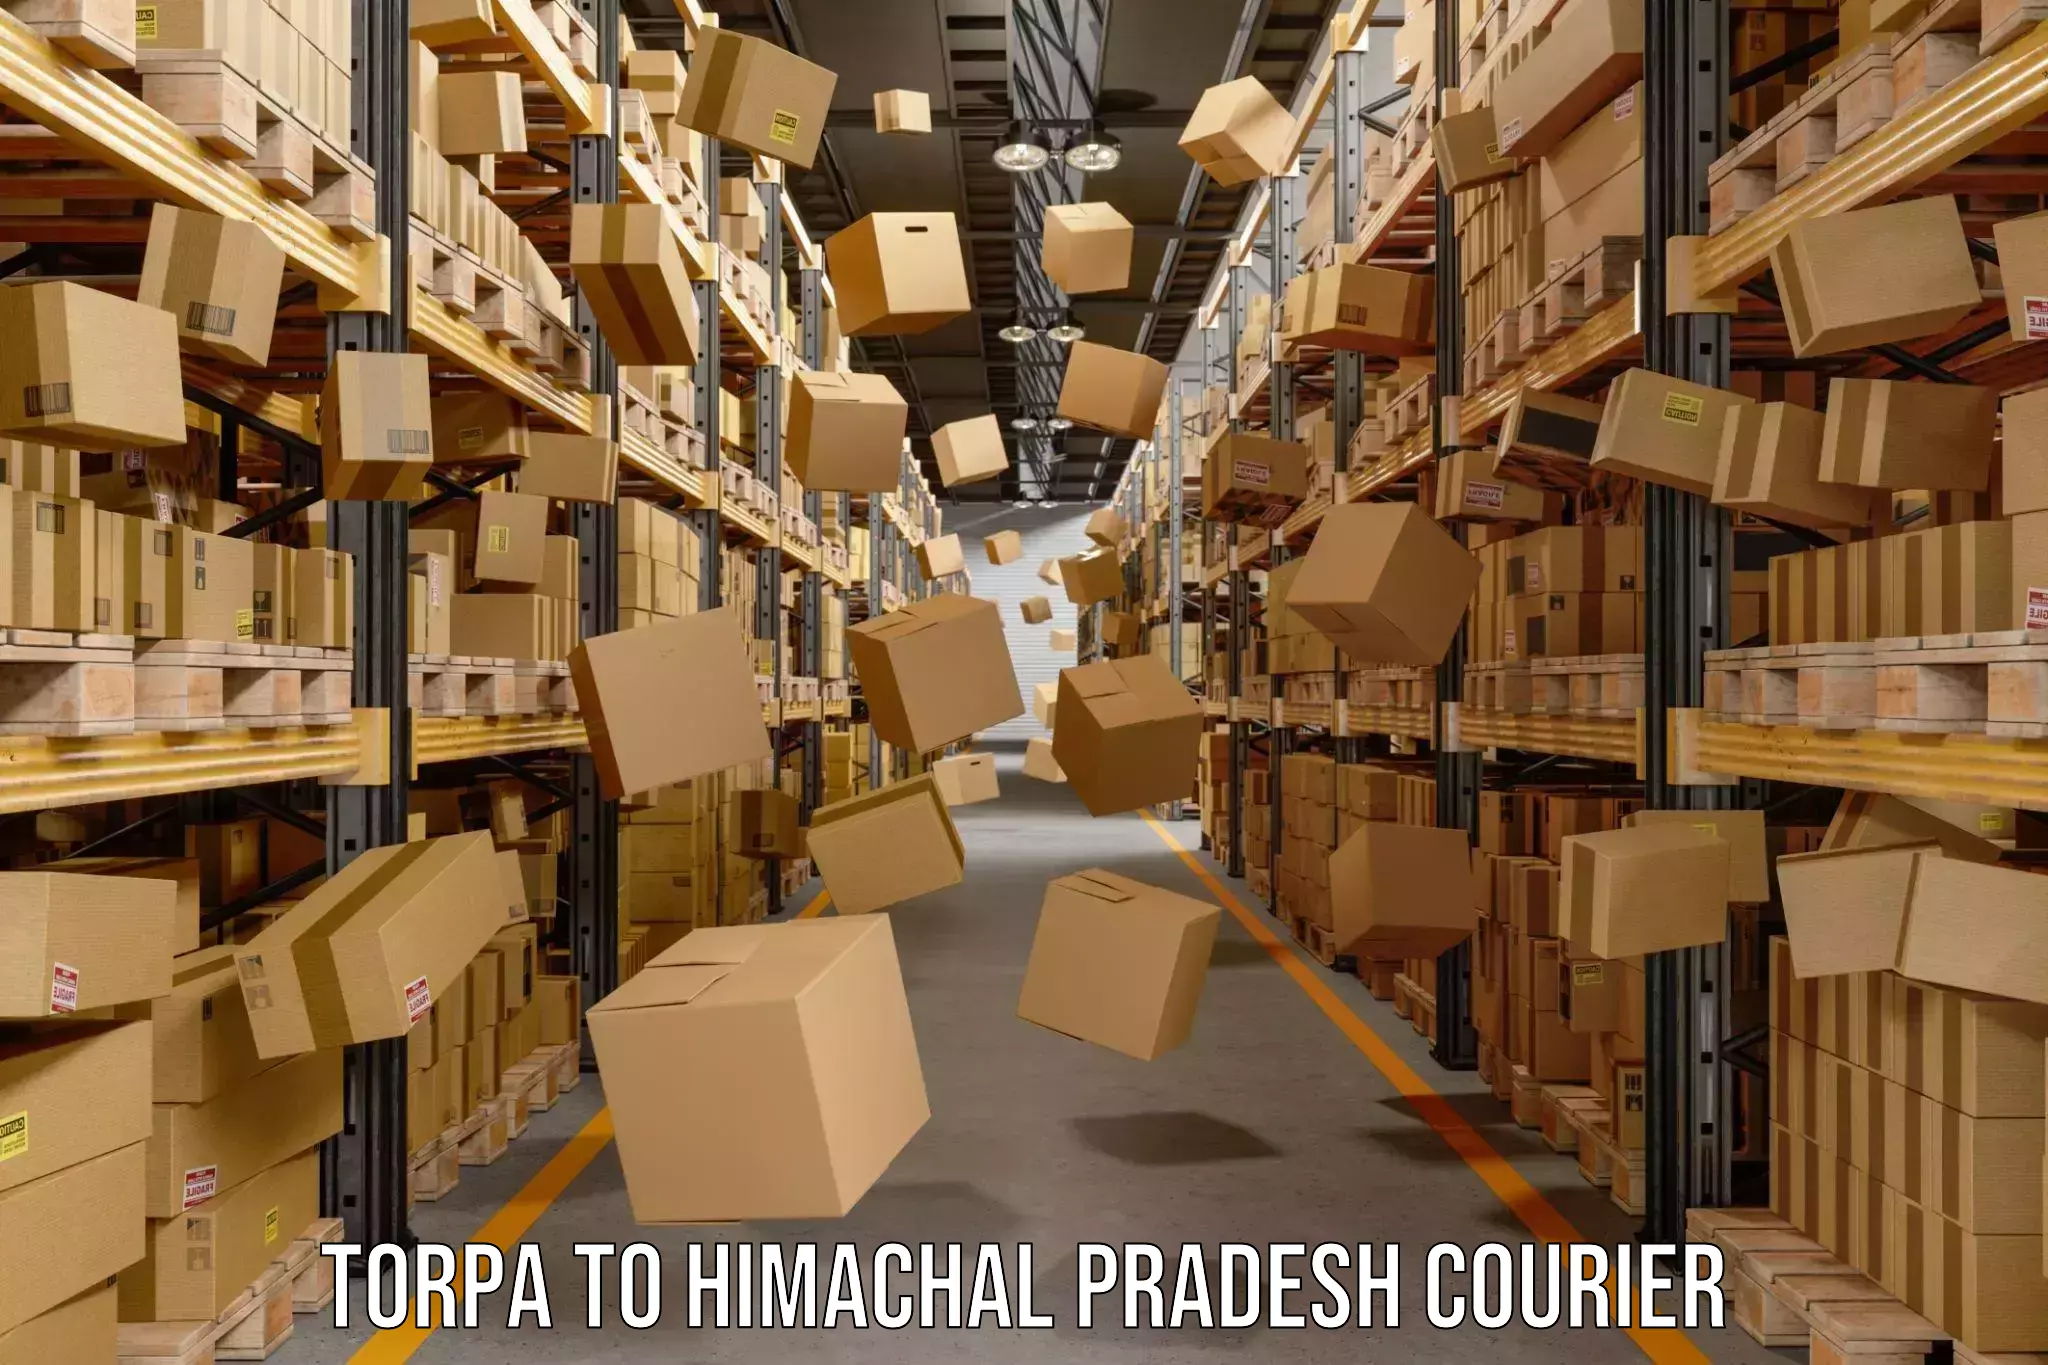 Next-day freight services Torpa to Himachal Pradesh